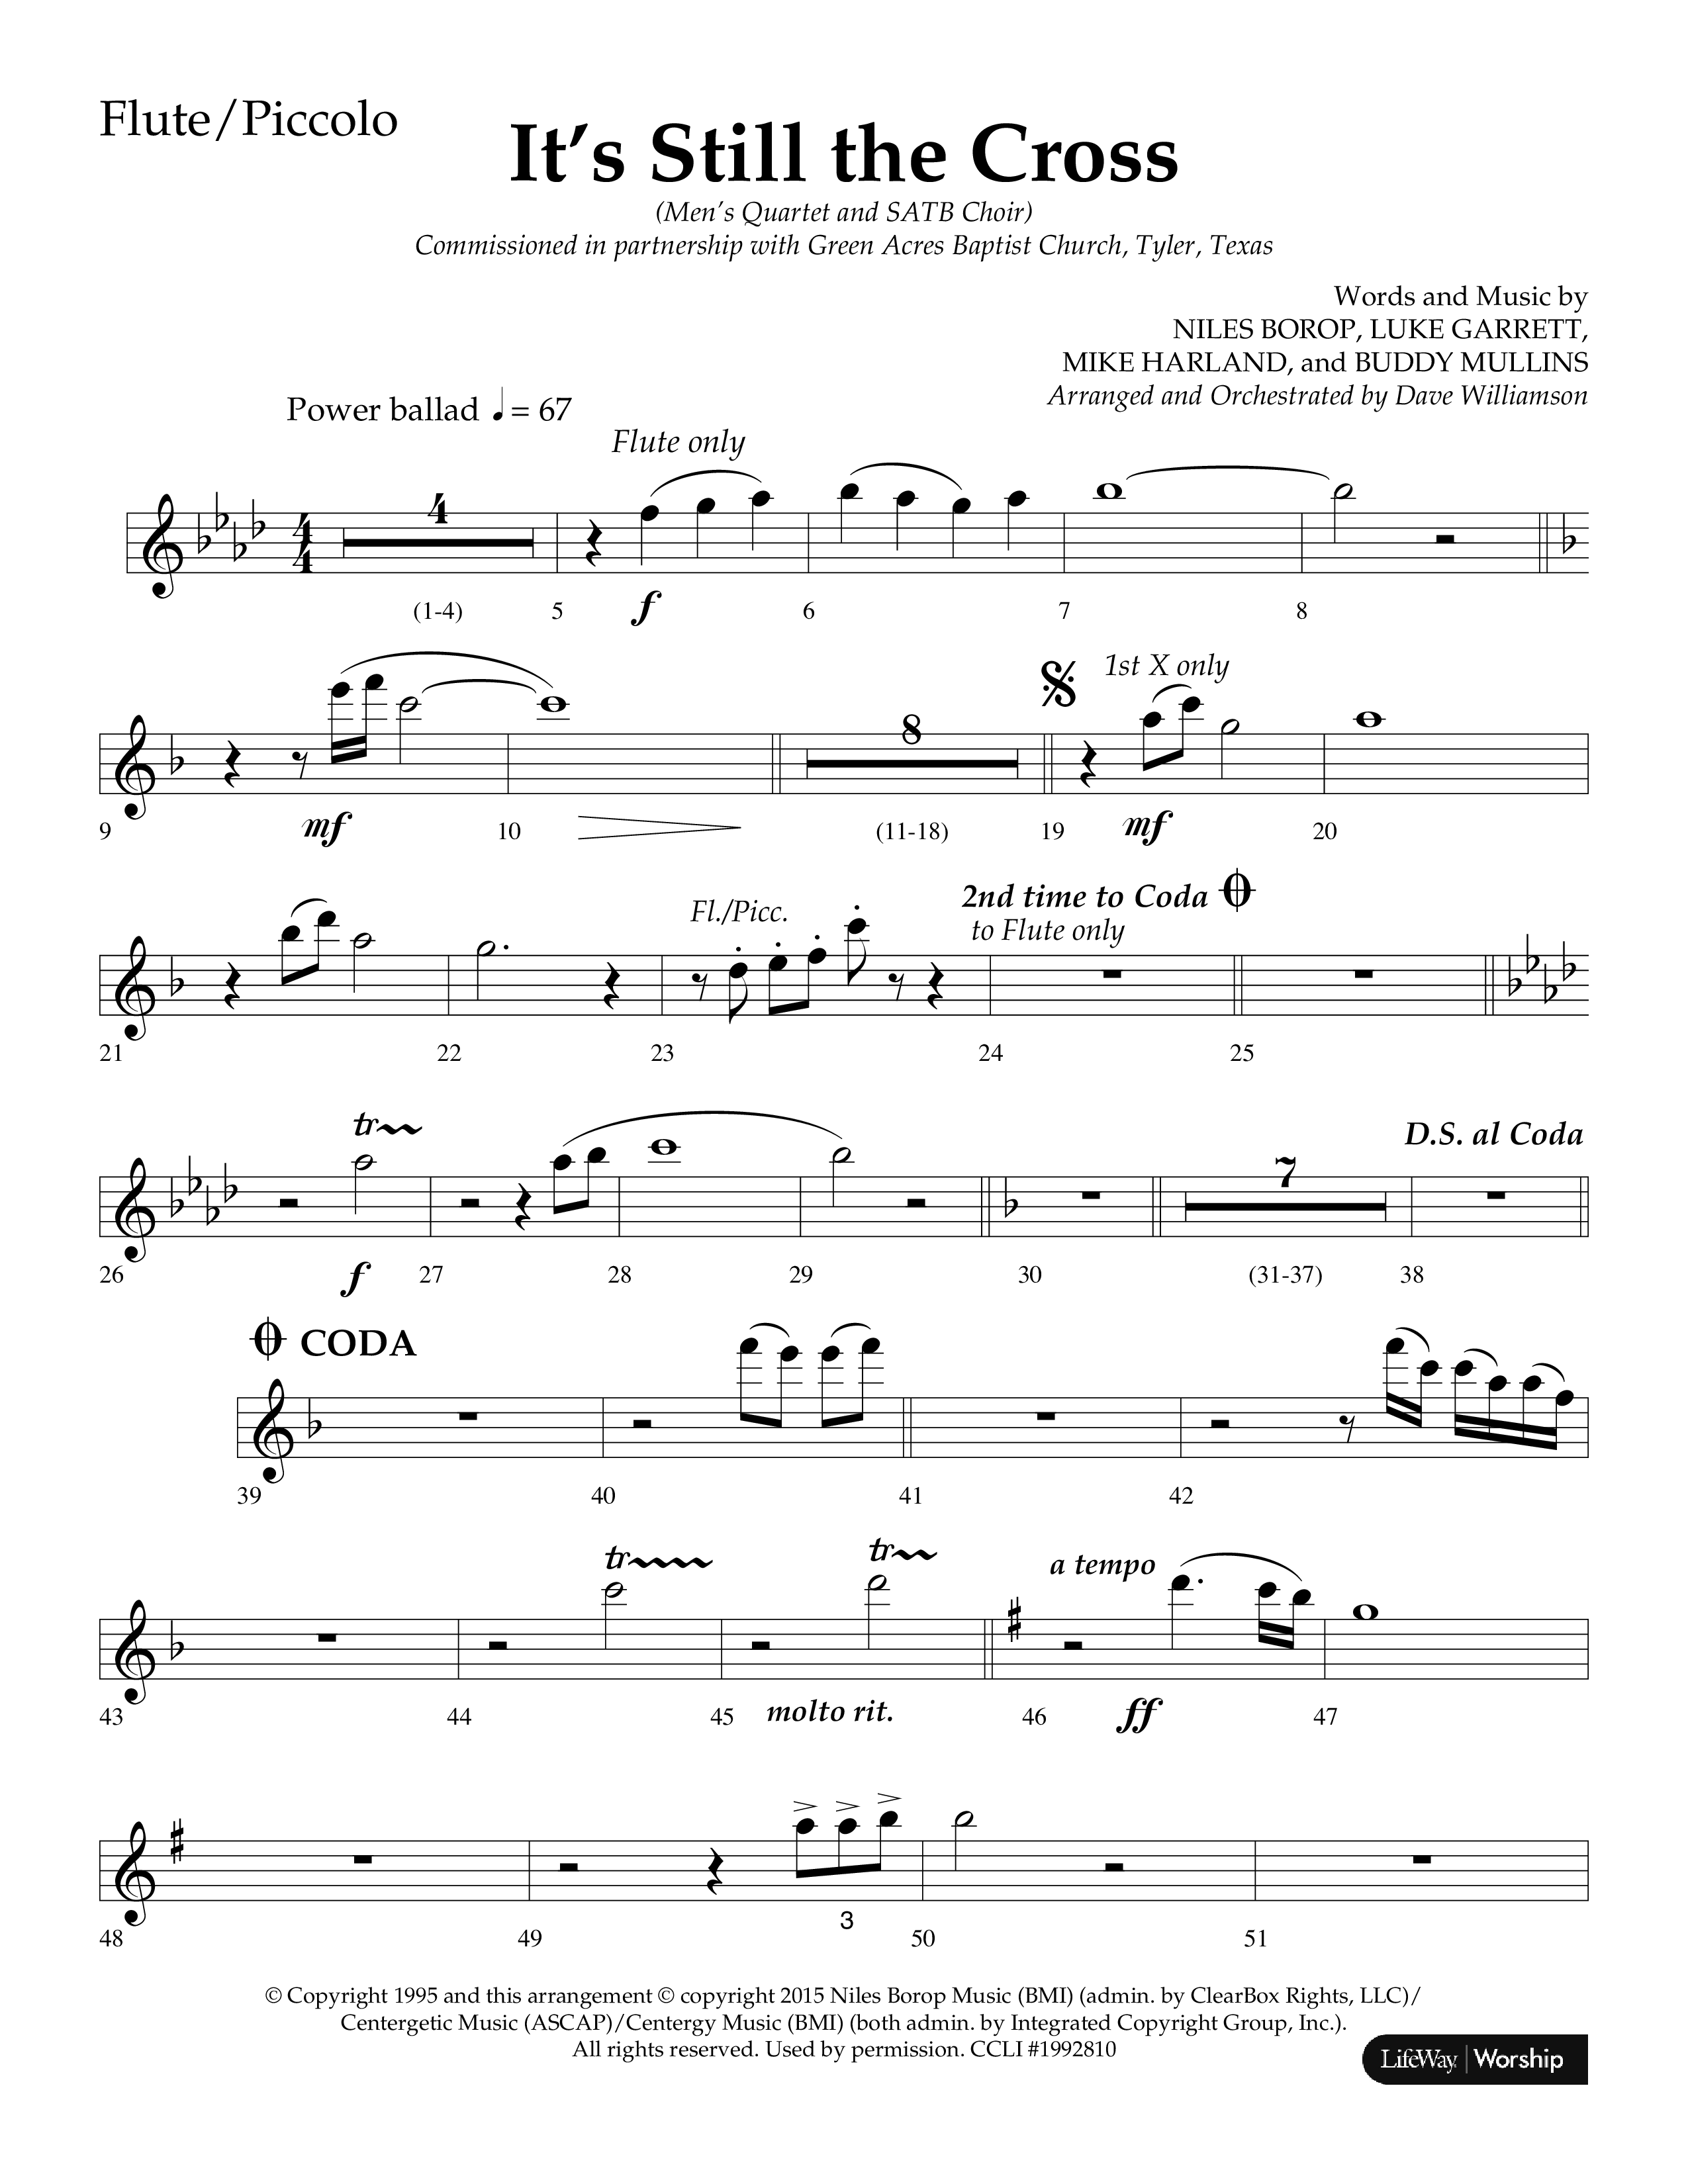 It’s Still The Cross (Choral Anthem SATB) Flute/Piccolo (Lifeway Choral / Arr. Dave Williamson)